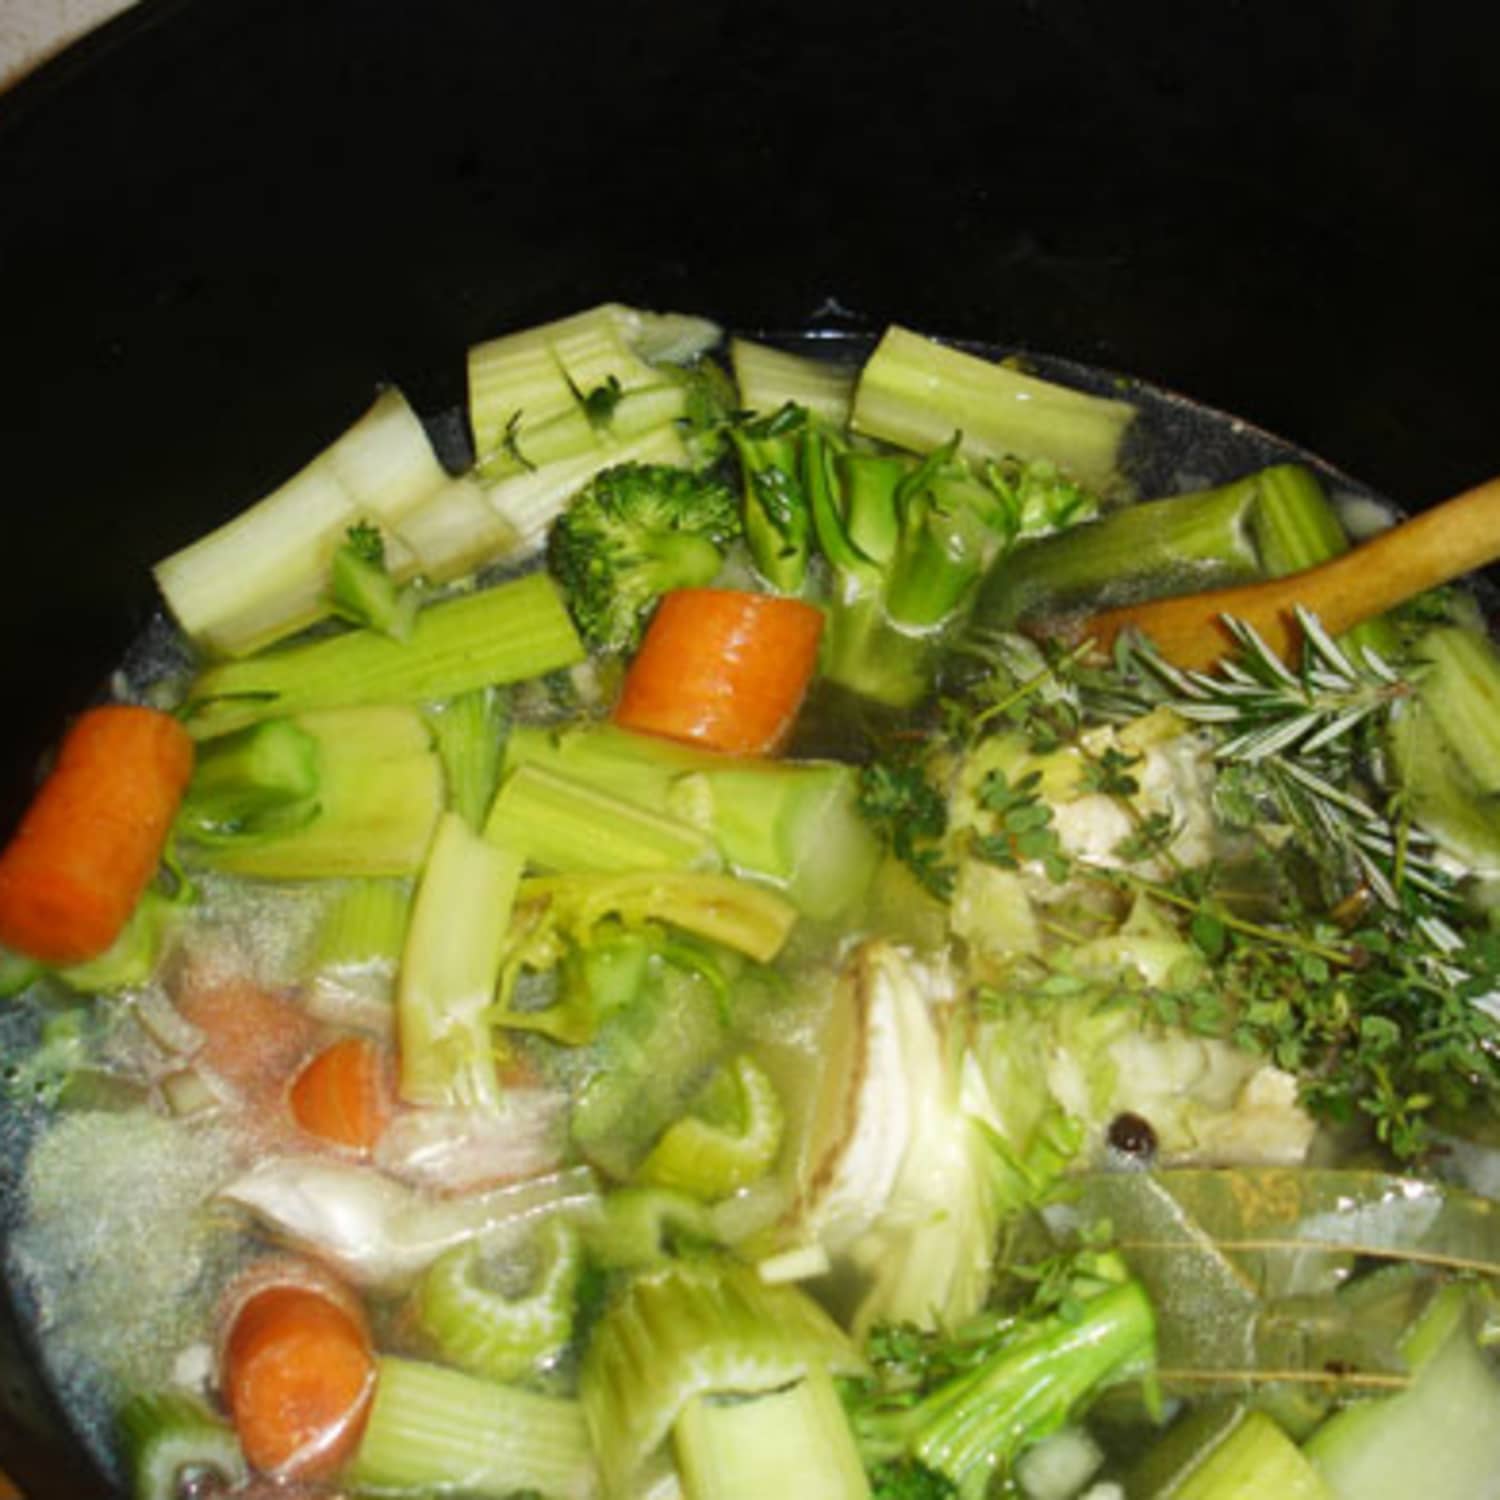 vegetable stock from scraps